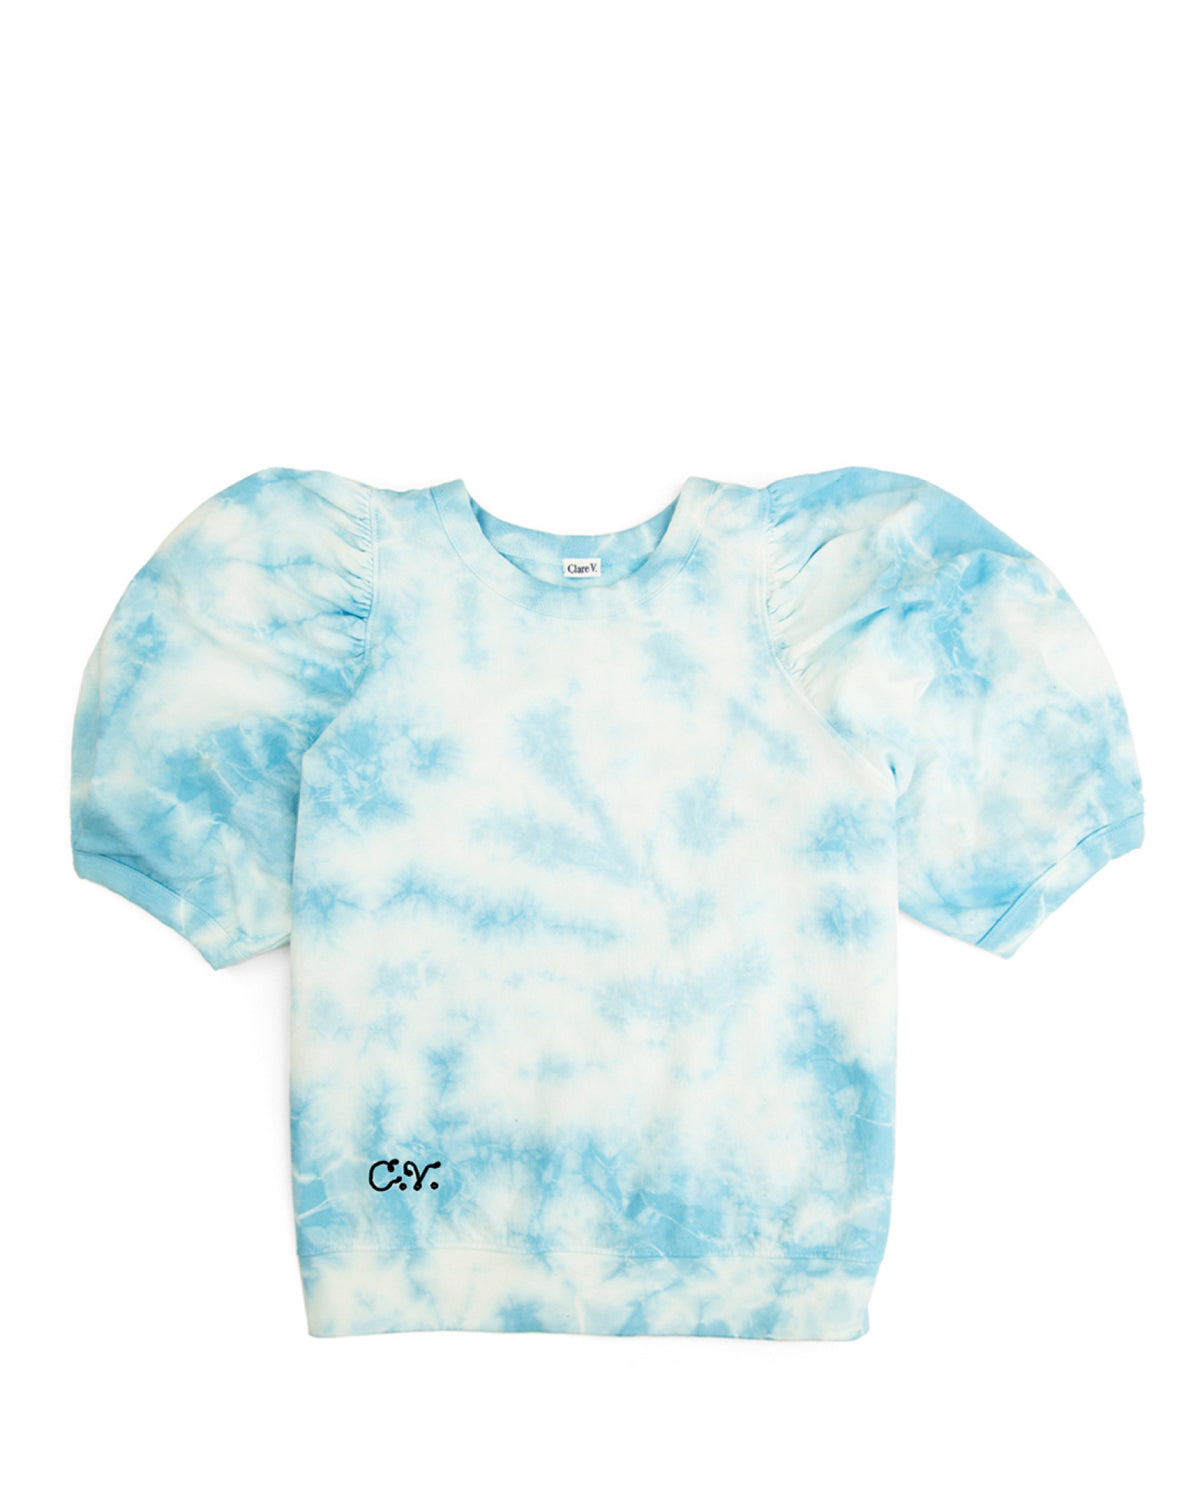 Blue Tie Dye Puff Sleeve Sweatshirt with CV Embroidered Monogram in our Script Font